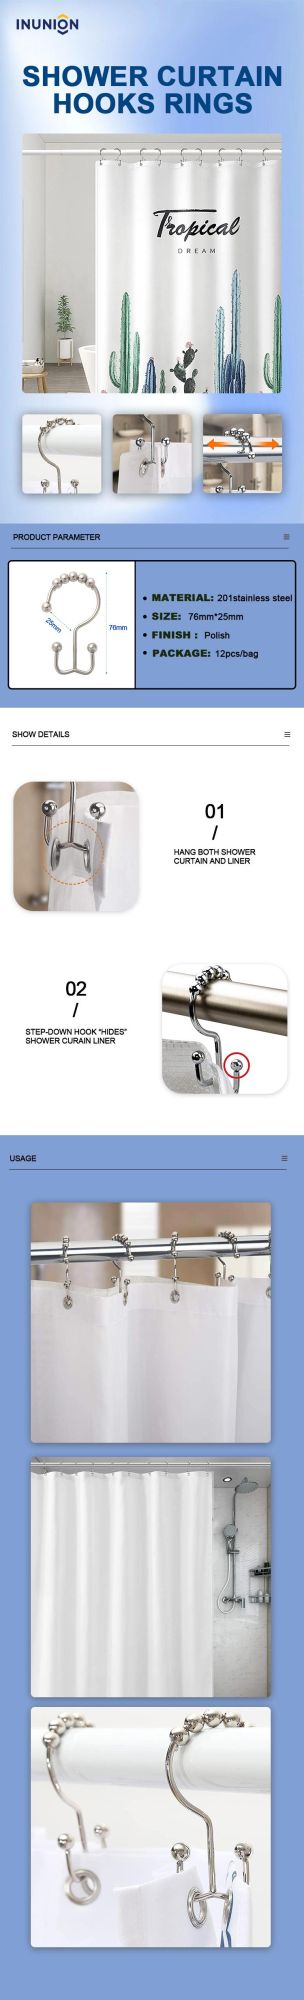 Stainless Steel Customized Home Hardware Shower Curtain Hook Ring